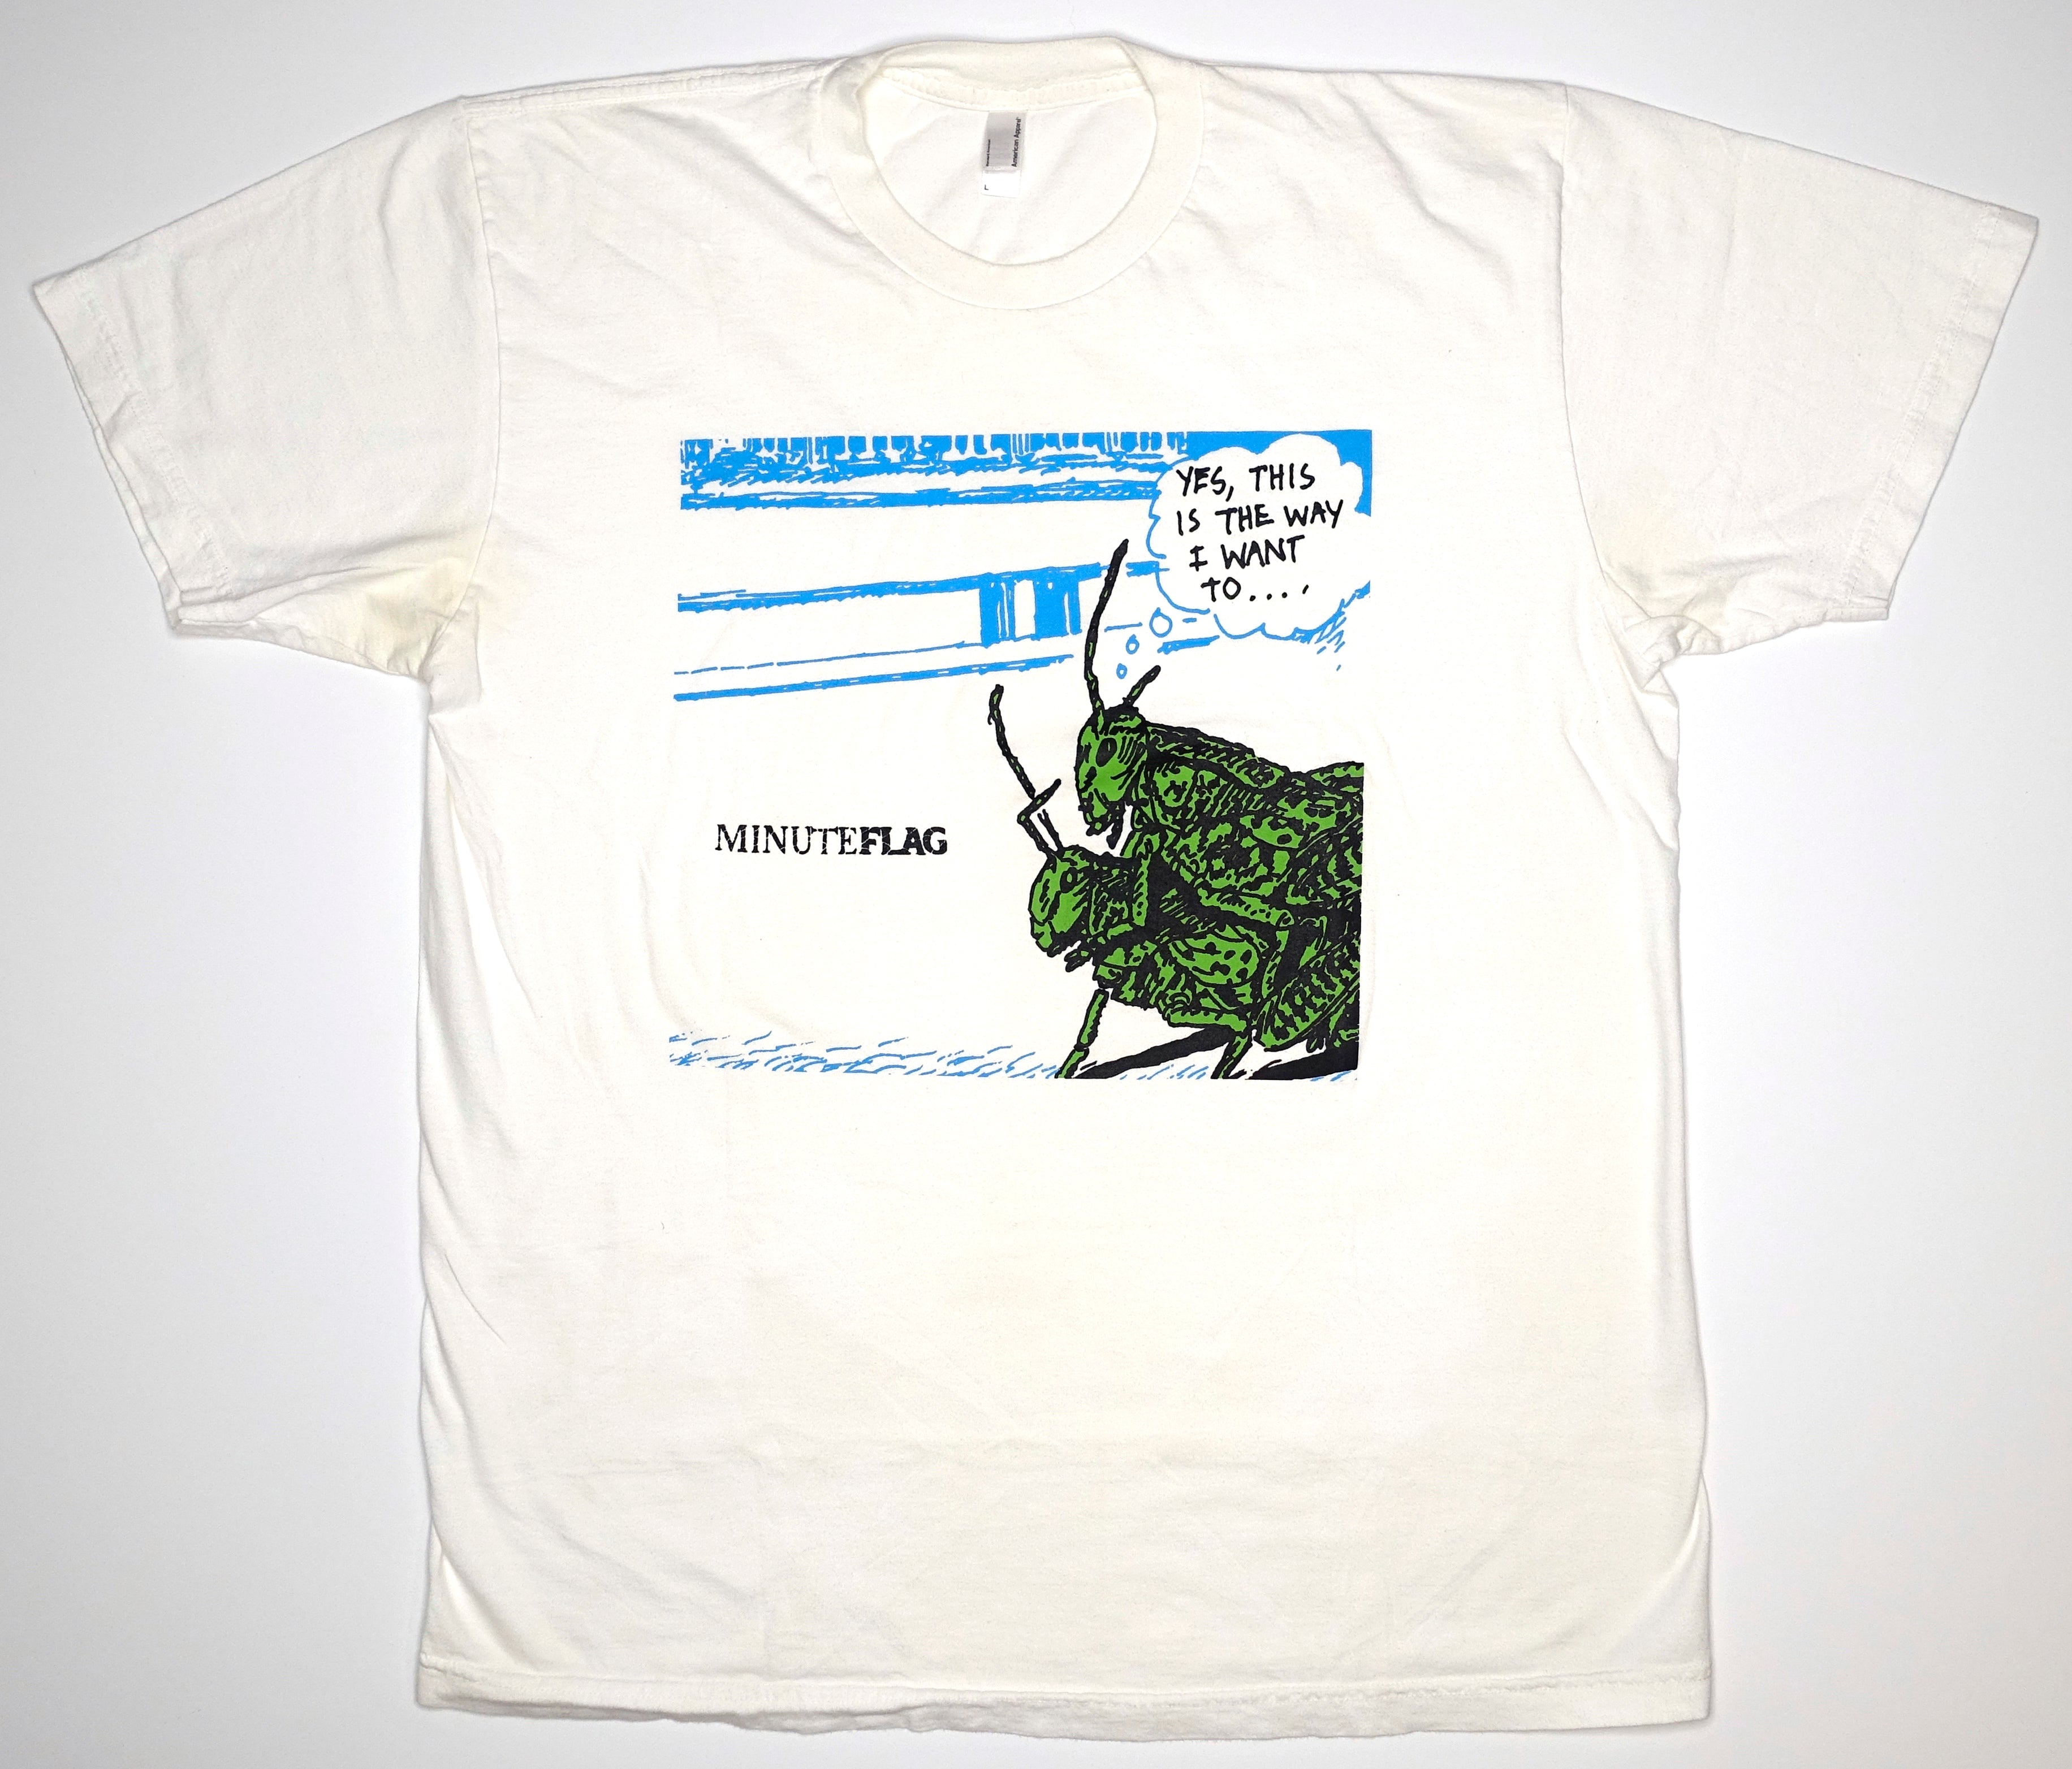 Minuteflag - Fetch The Water (Bootleg) Shirt Size Large